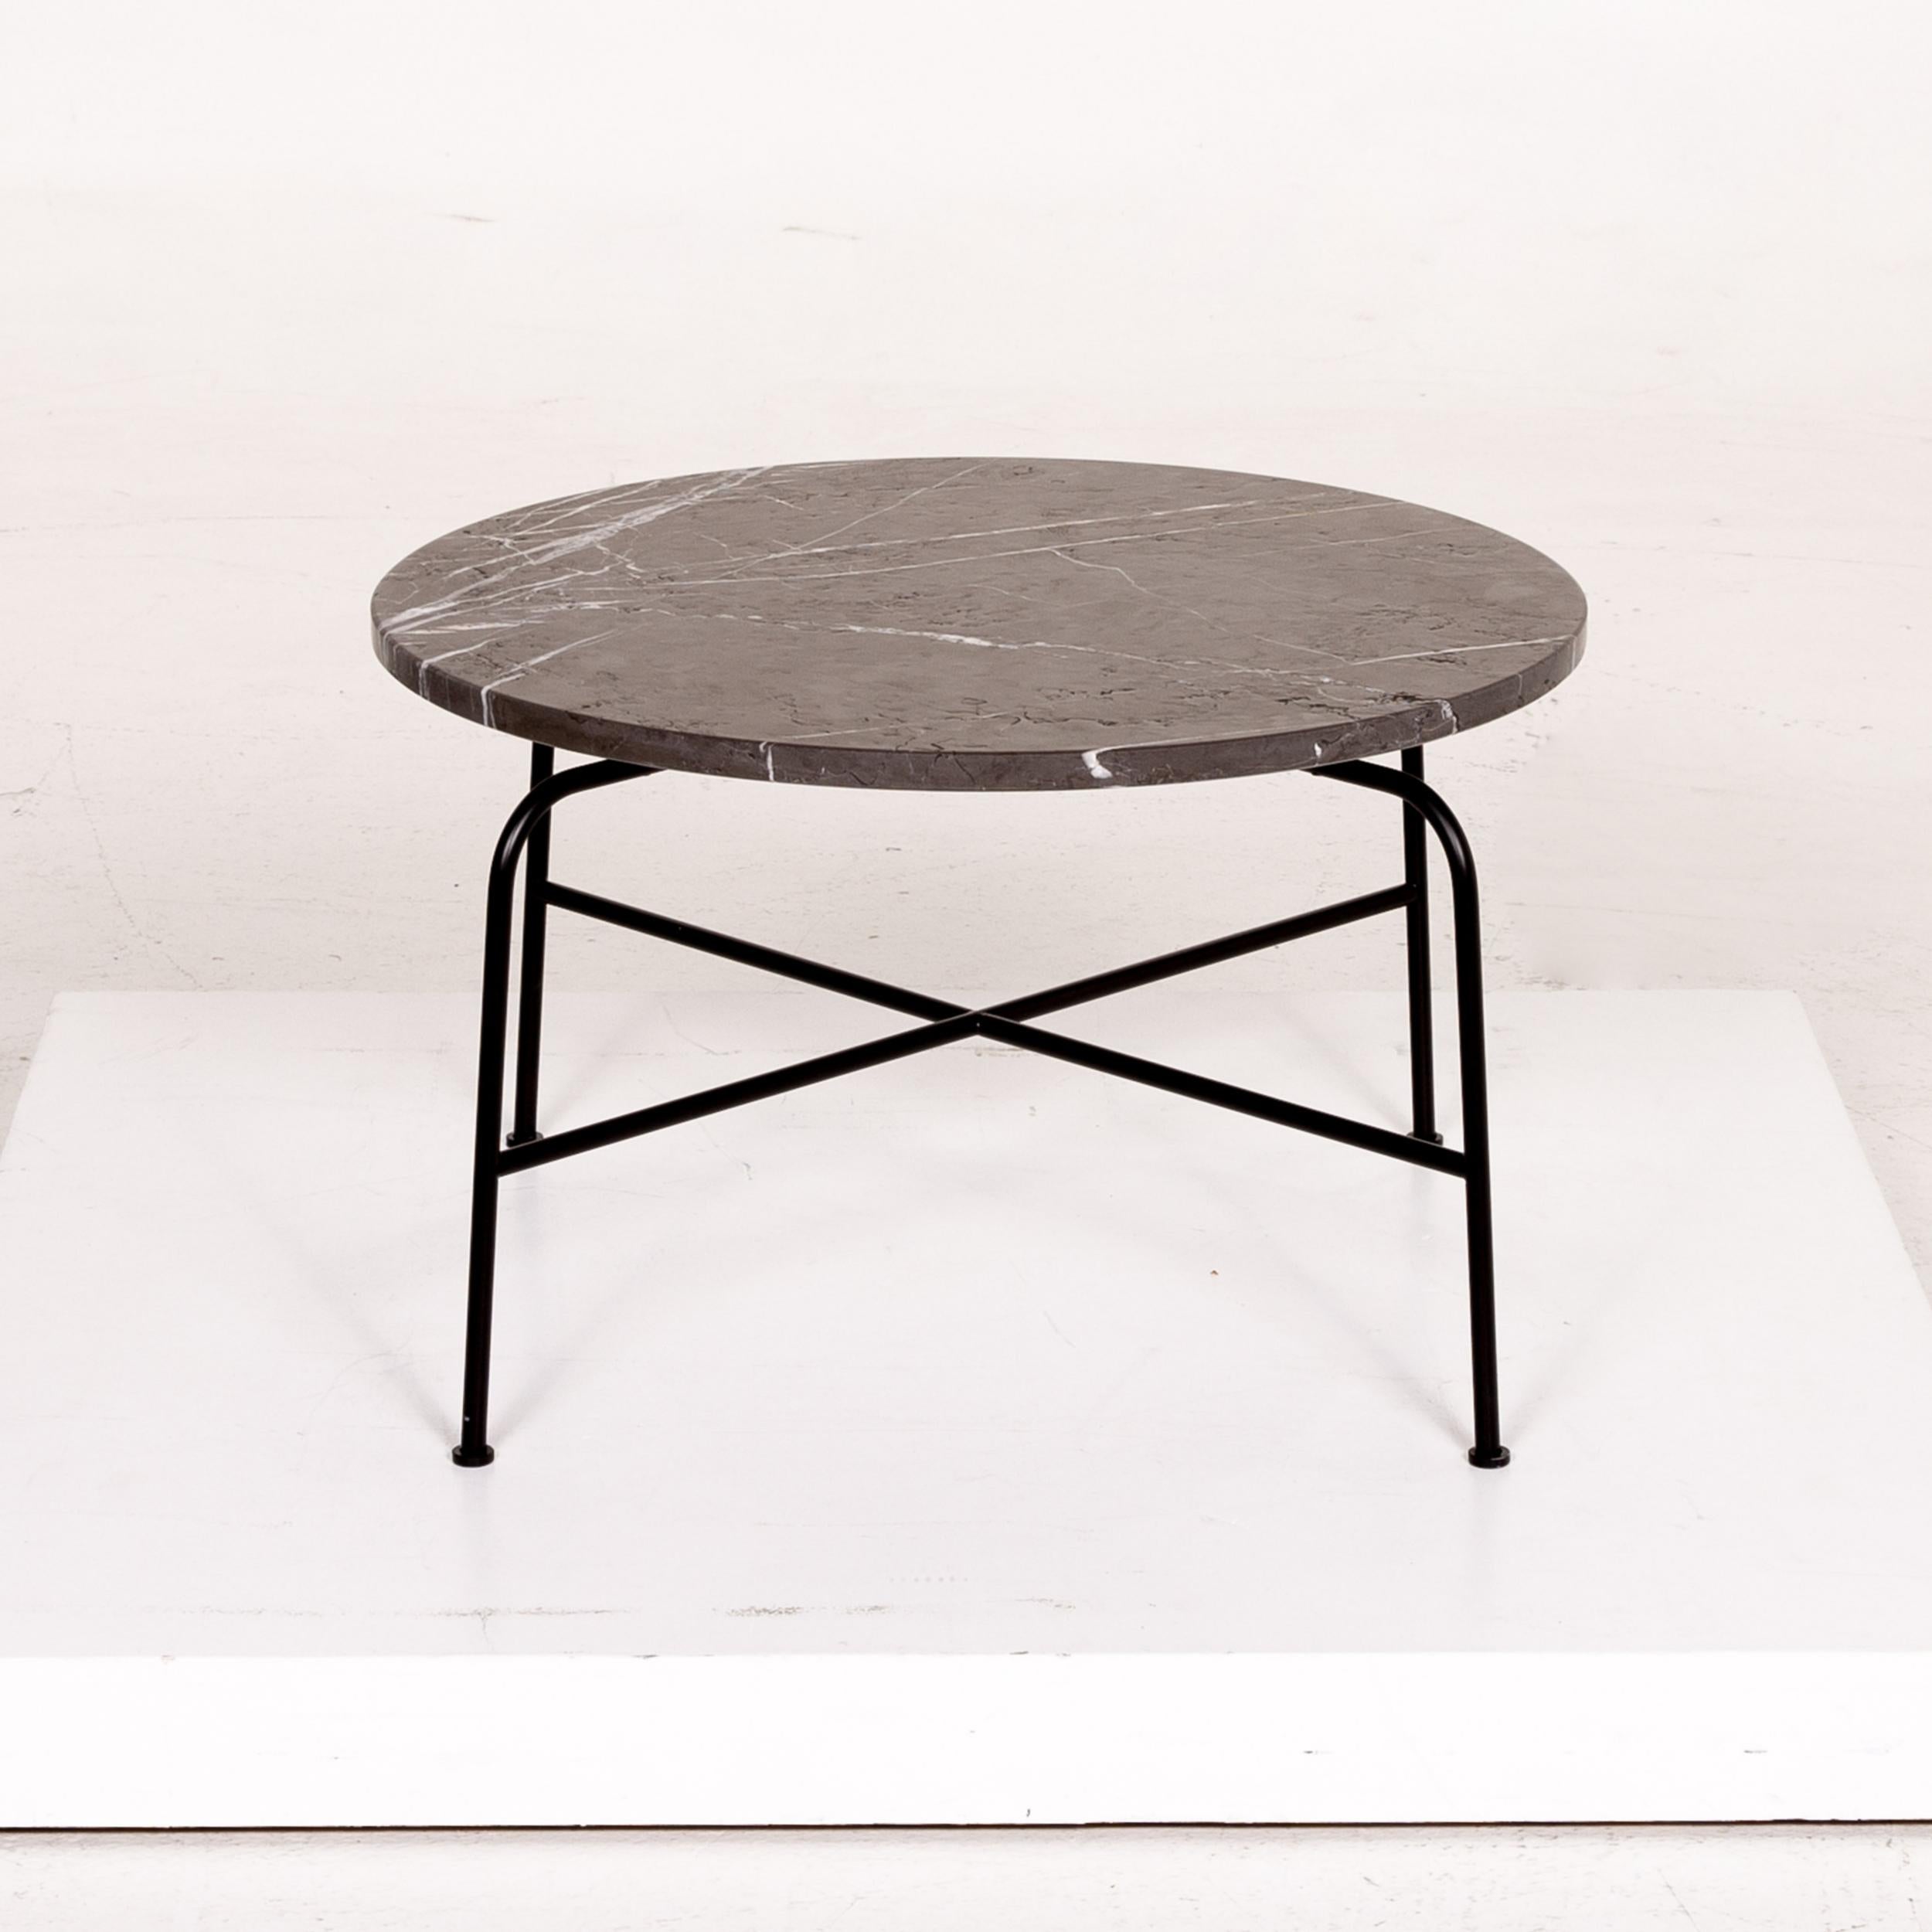 Rolf Benz 947 Graphite Coffee Table Anthracite Marbled Table Industrial In Excellent Condition For Sale In Cologne, DE